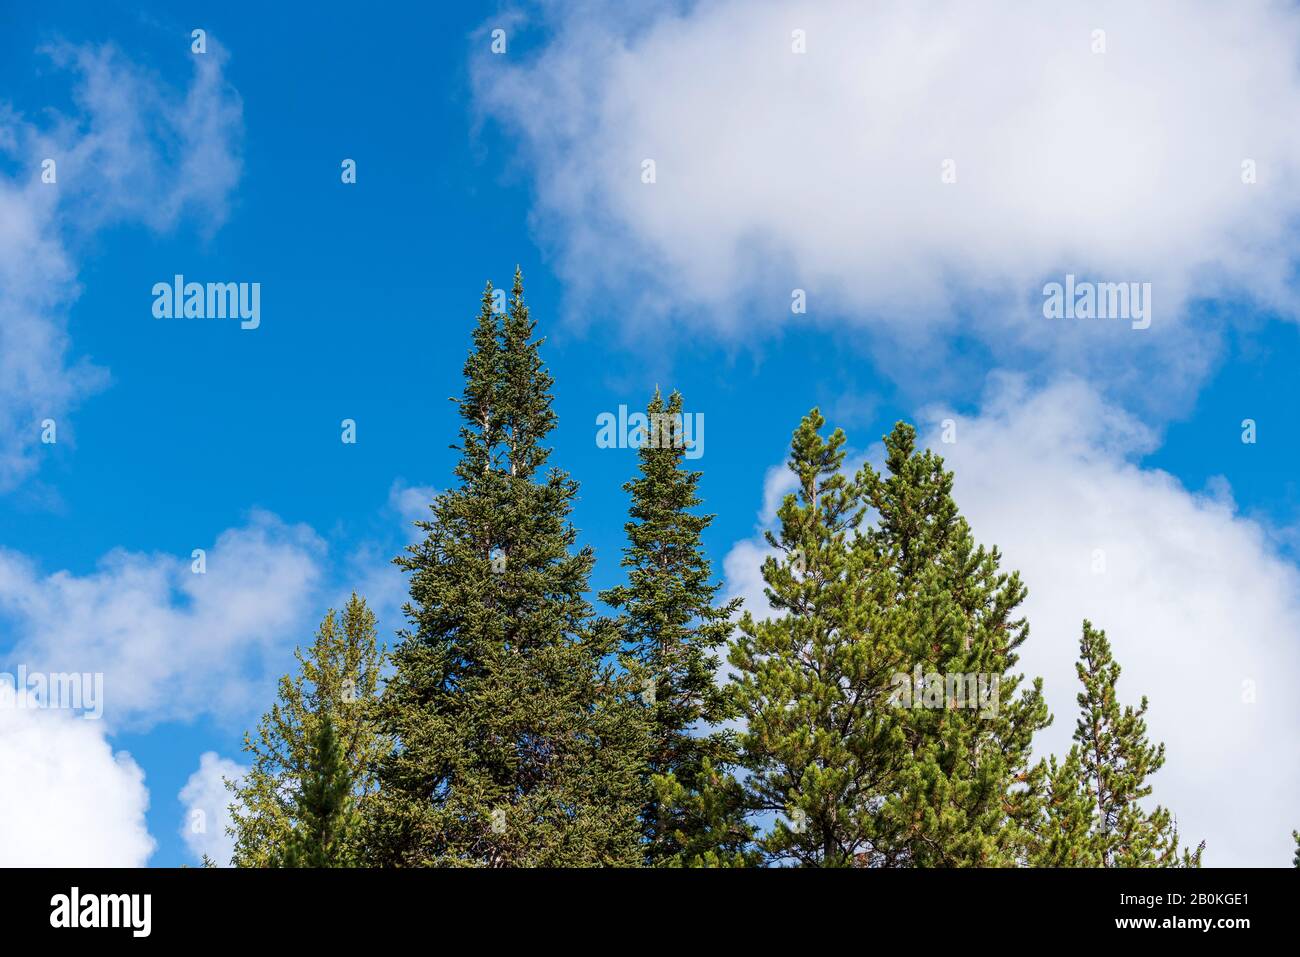 Green forest pine trees against a bright blue sky with white fluffy clouds. Stock Photo